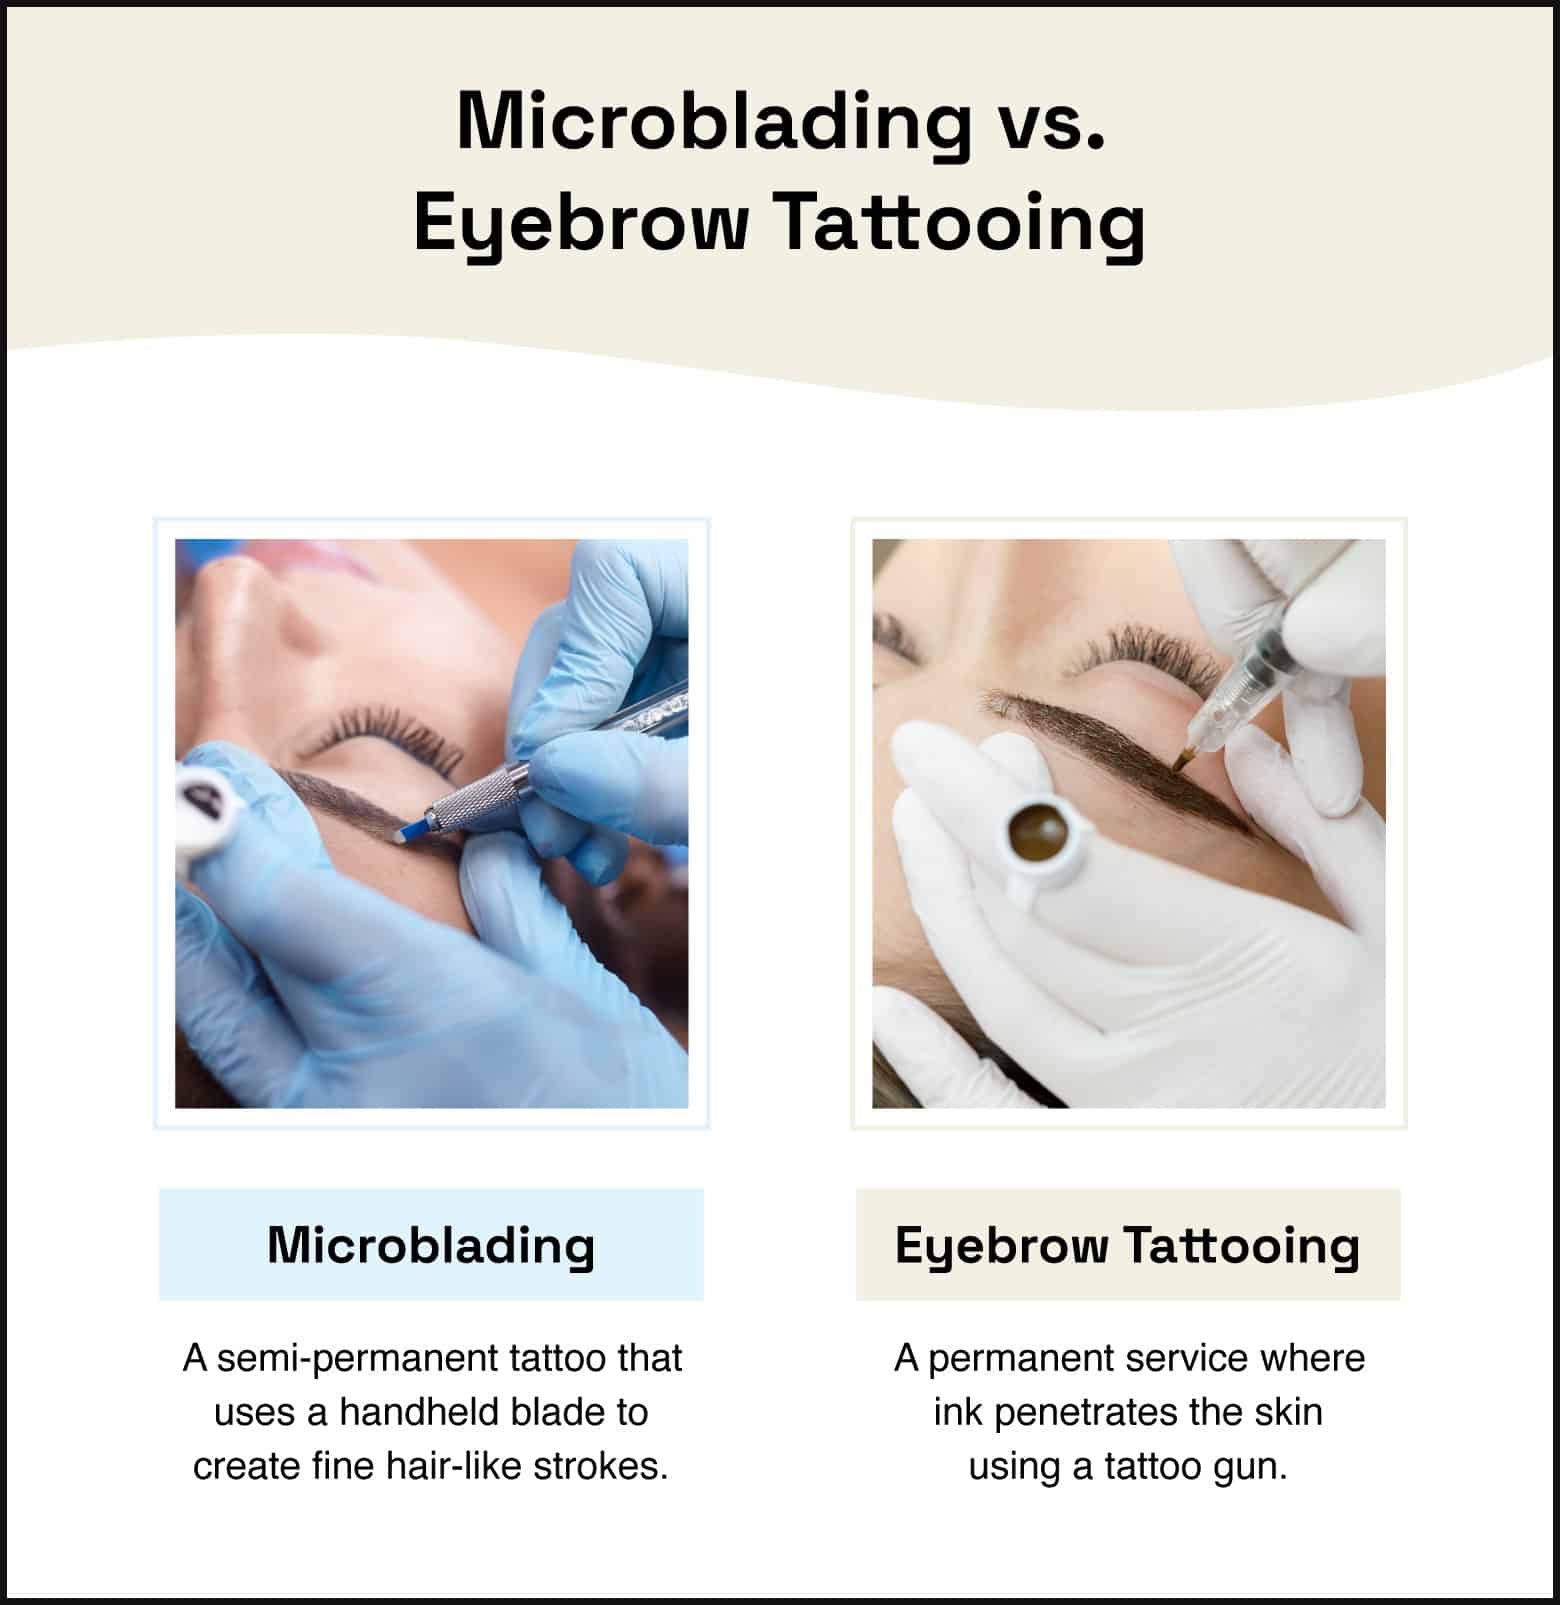  A photo of a woman getting her eyebrows microbladed with a single blade is compared to a photo of a woman getting her eyebrows microbladed with a tattoo gun. 